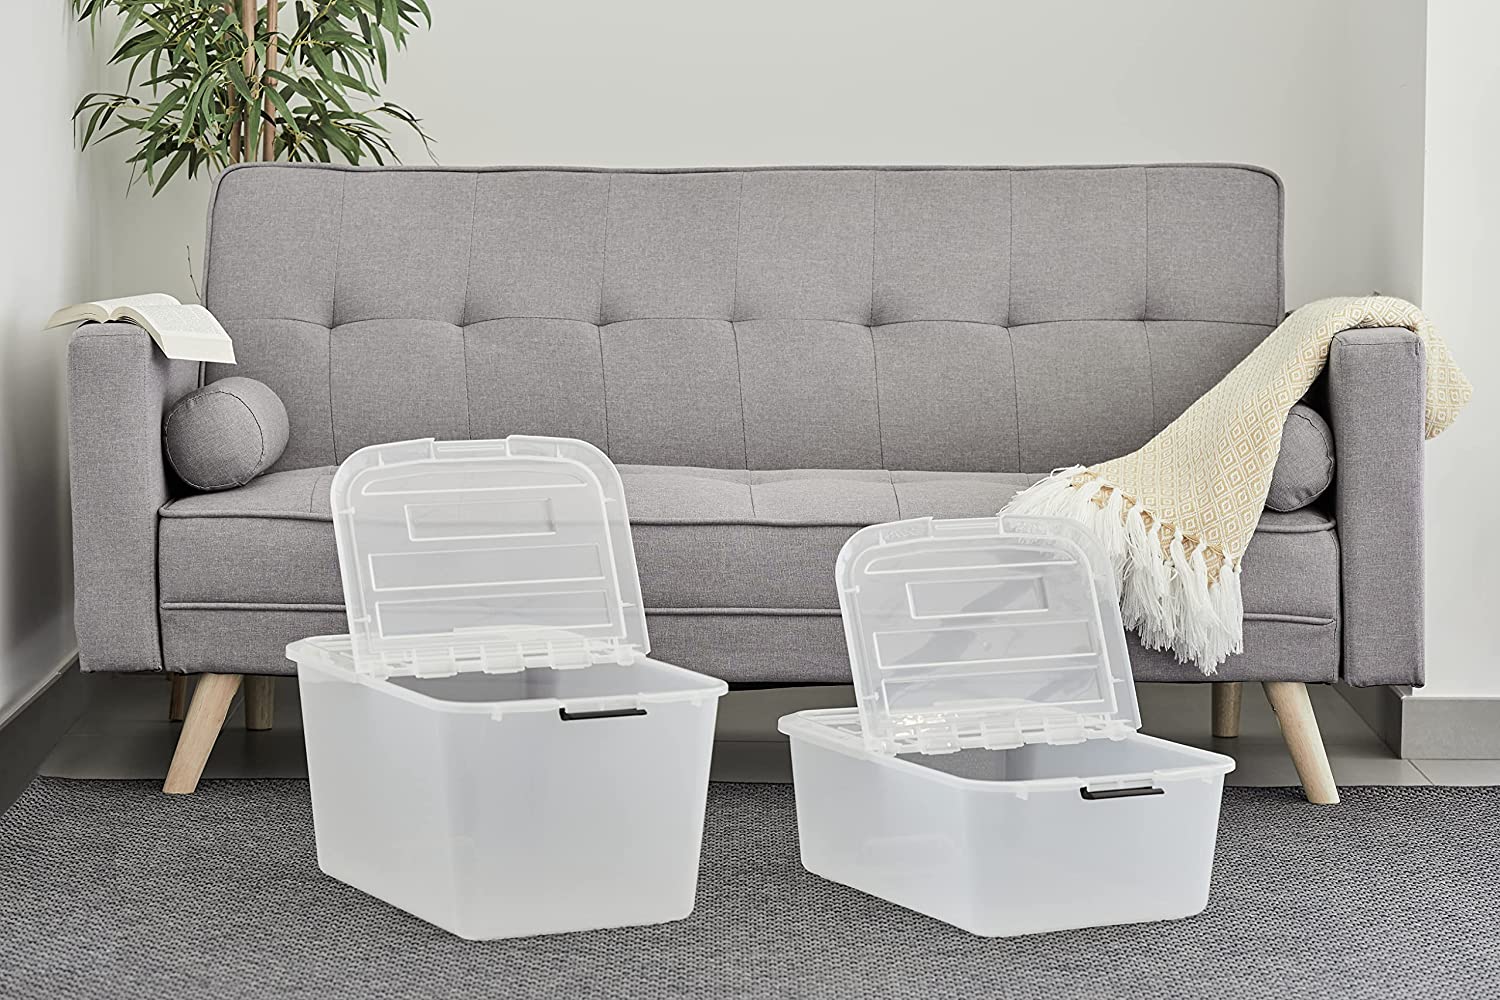 Iris Ohyama-TBH-45  Set of 6 storage boxes- Transparent, 45 L - Stackable with Clips for Bedroom, Living room